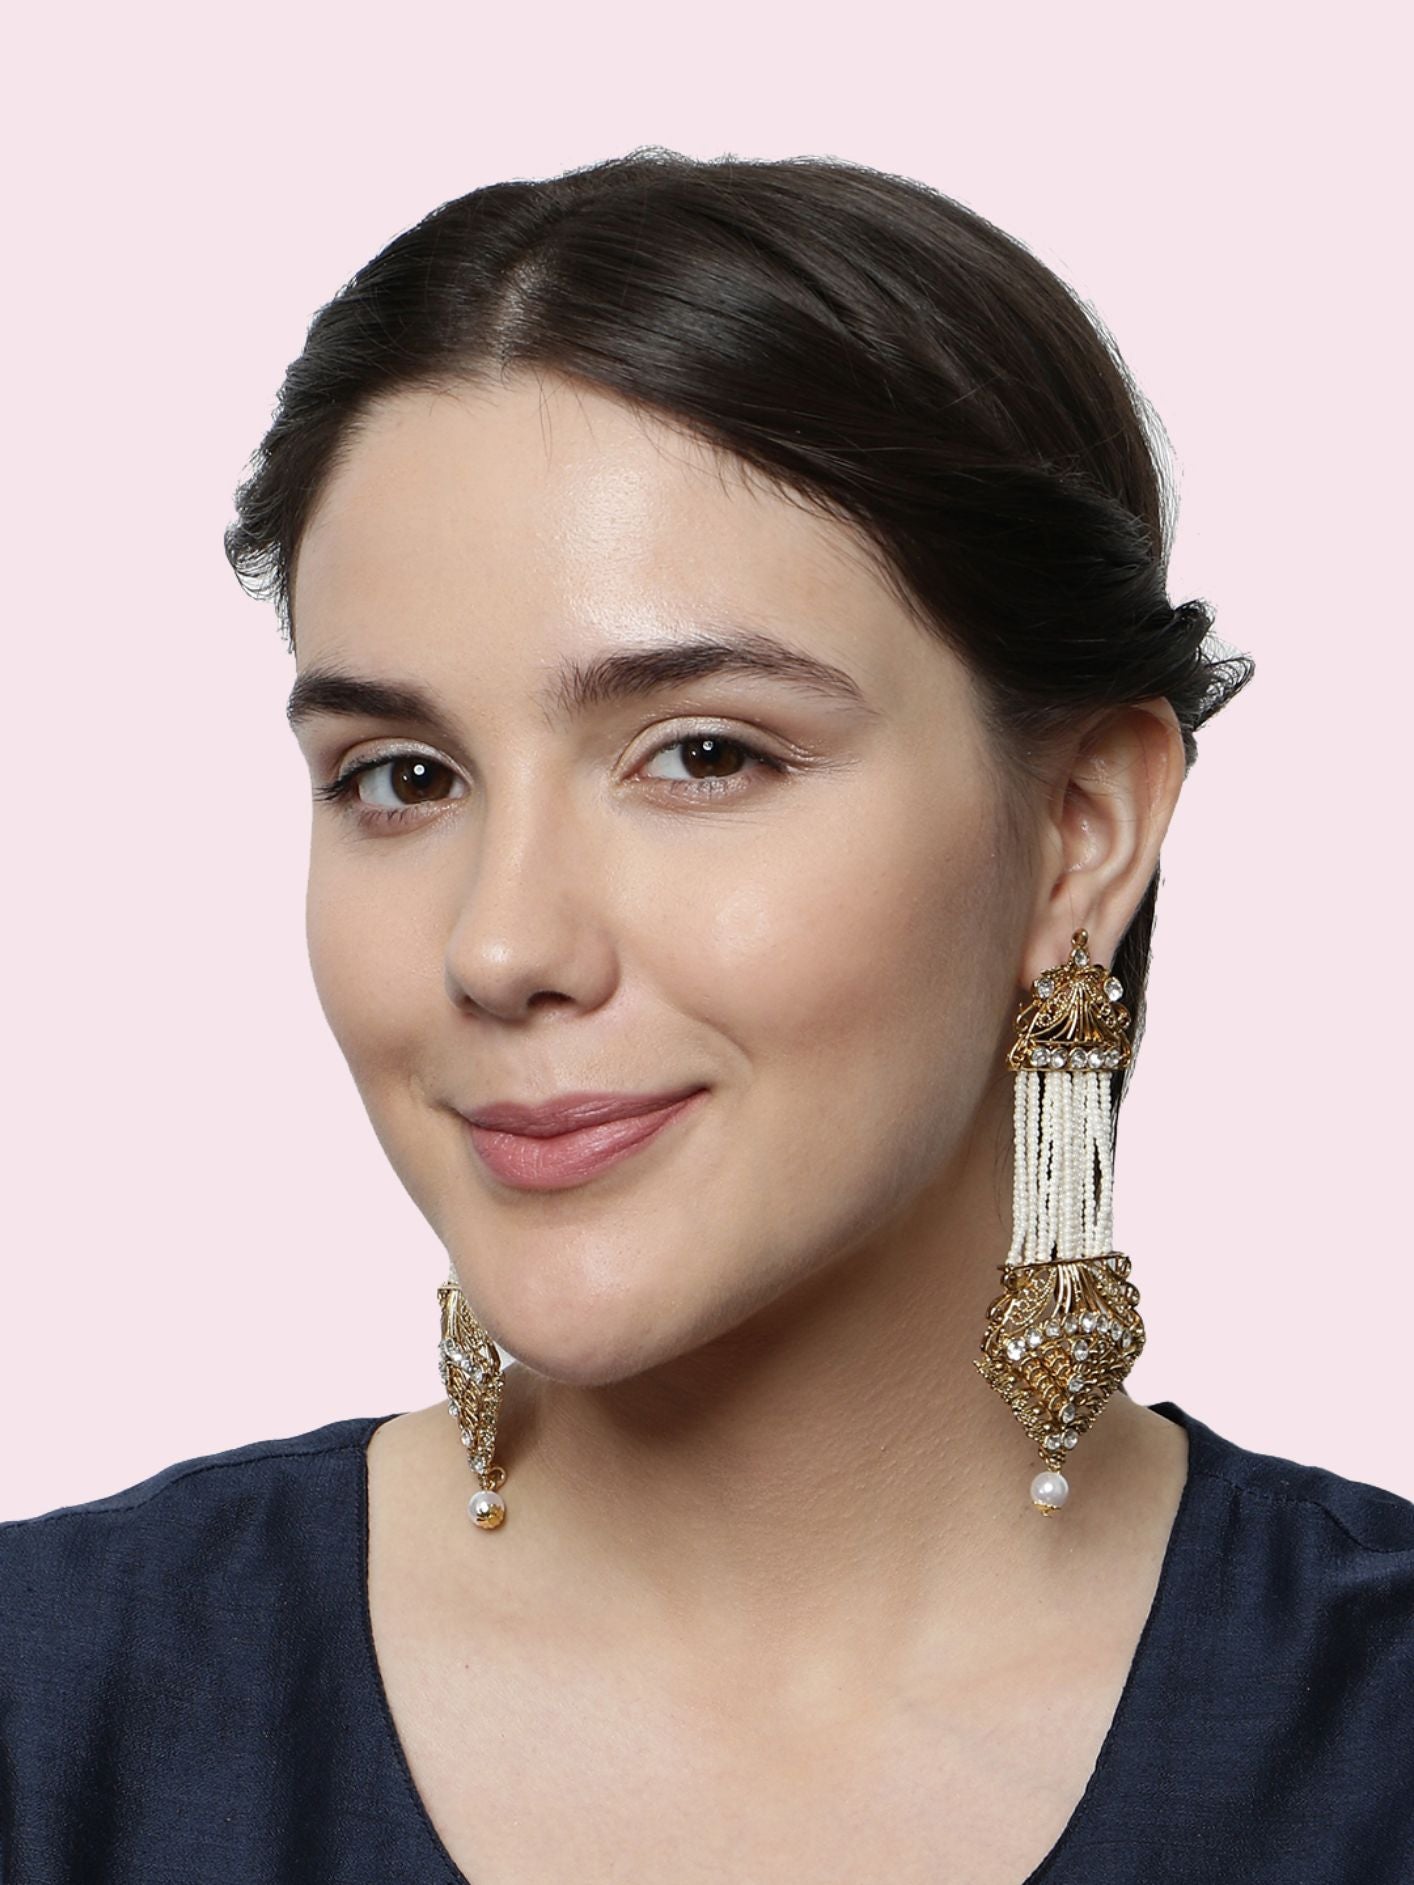 Women's White & Gold-Plated Handcrafted Kundan Pearl Studded Multistrand Earrings - Anikas Creation